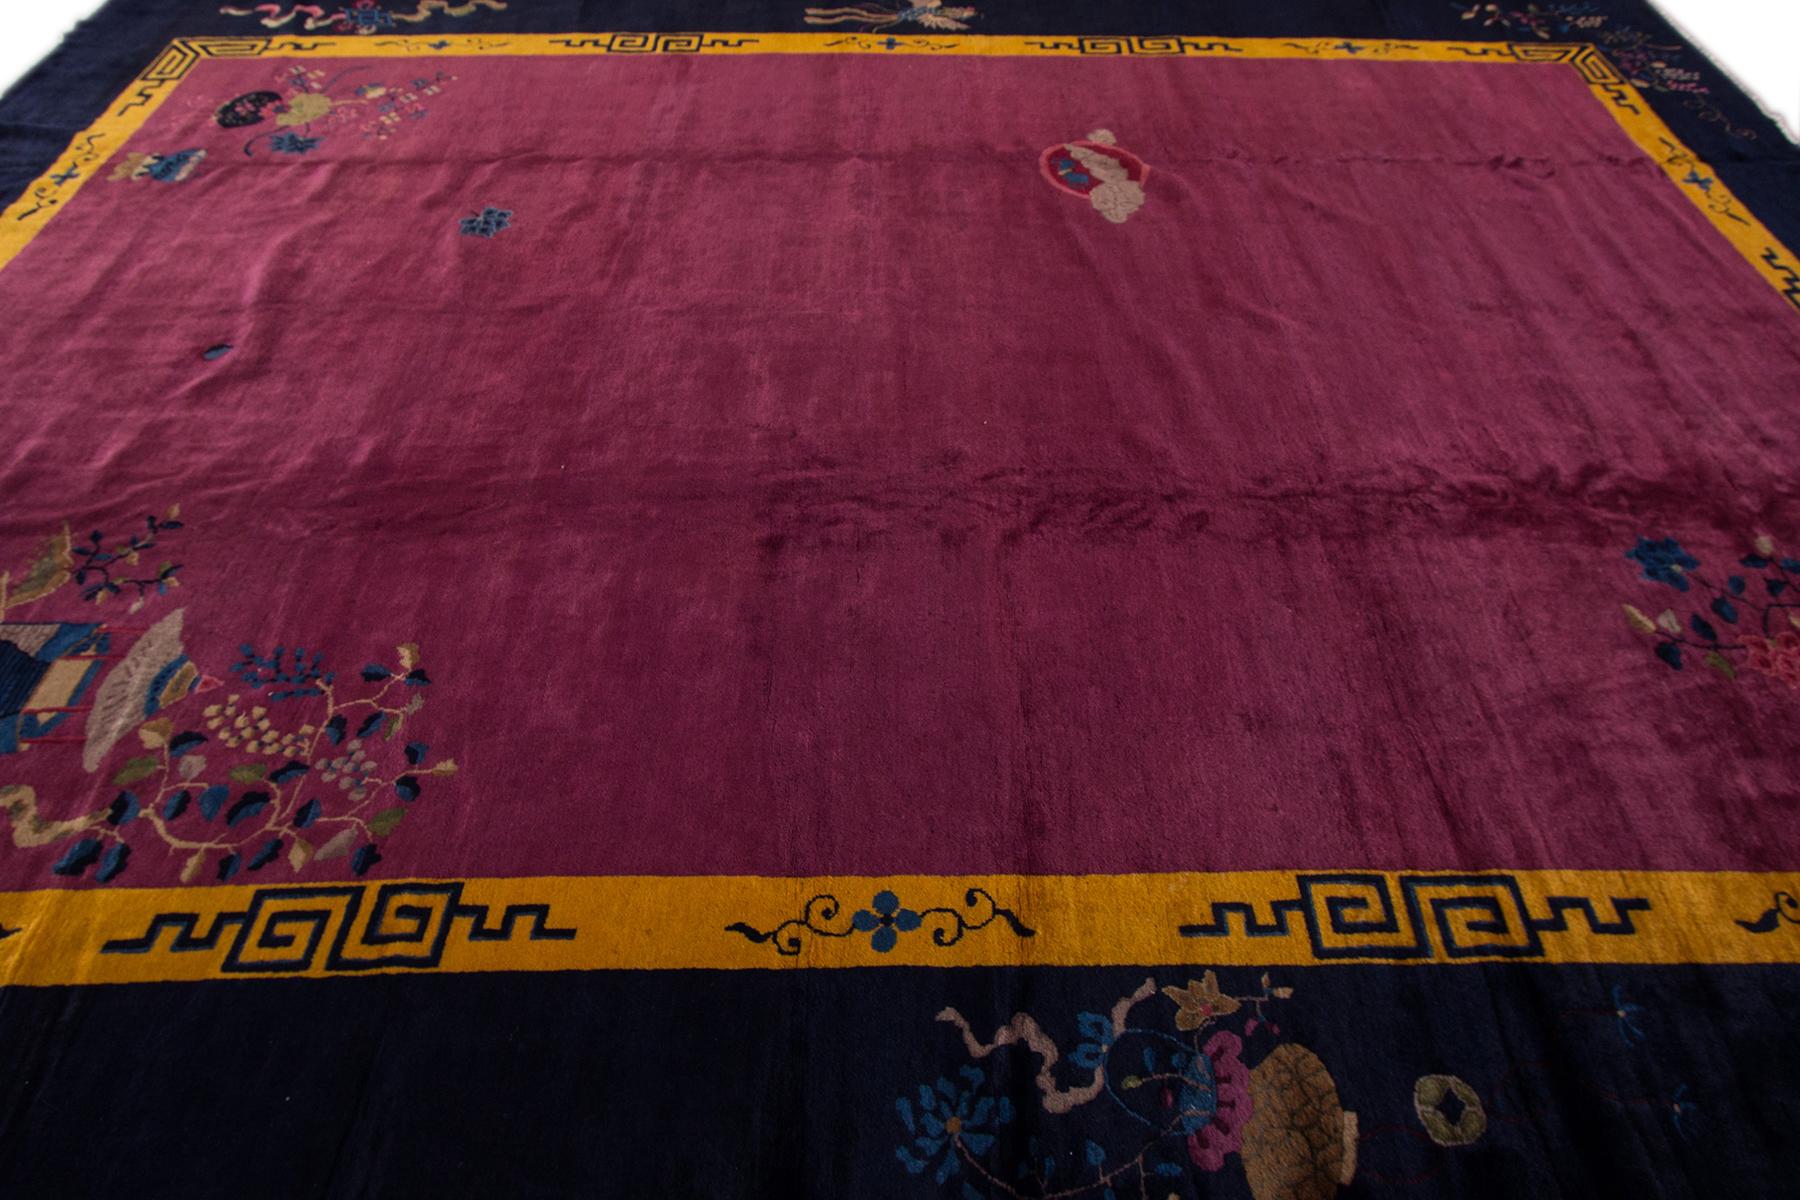 Beautiful Antique Chinese Deco Rug, hand-knotted wool with a purple field, dark blue frame in an allover classic Chinese design.
Circa 1920.

This rug measures 11' 3